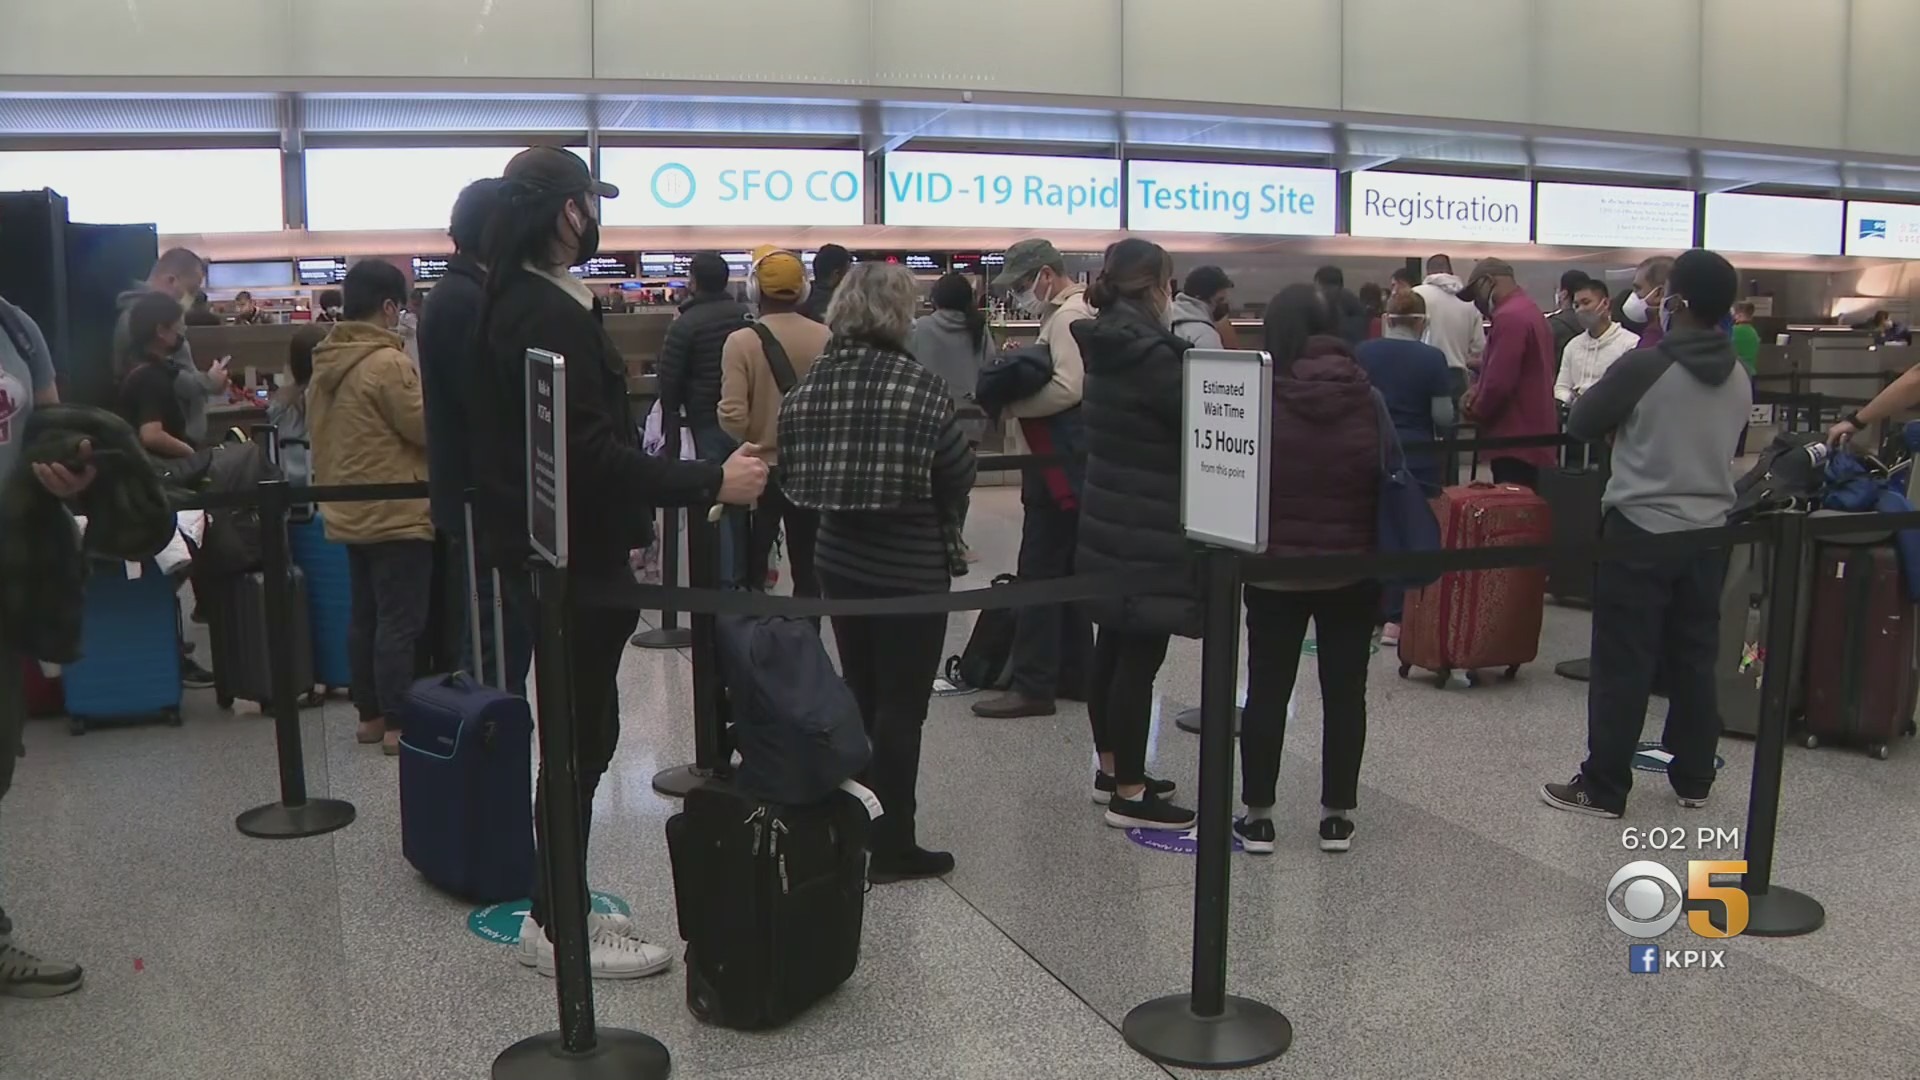 Lines for COVID-19 testing at San Francisco International Airport, December 22, 2021. (CBS)